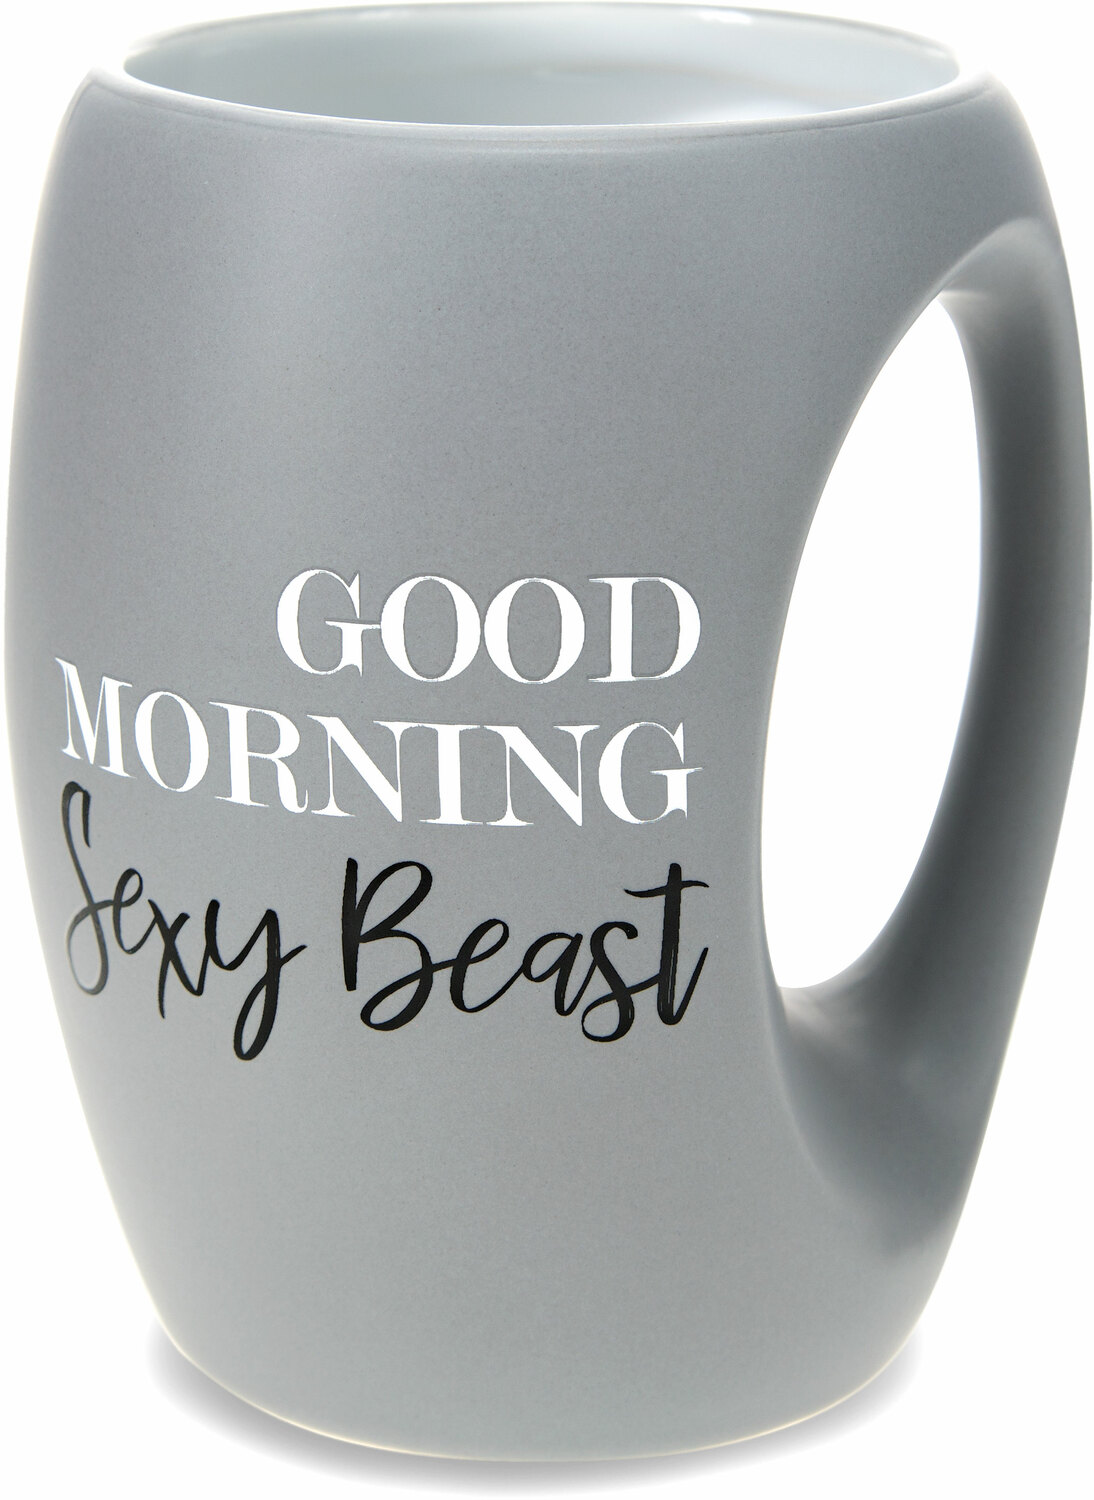 Sexy Beast by Good Morning - Sexy Beast - 16 oz Cup